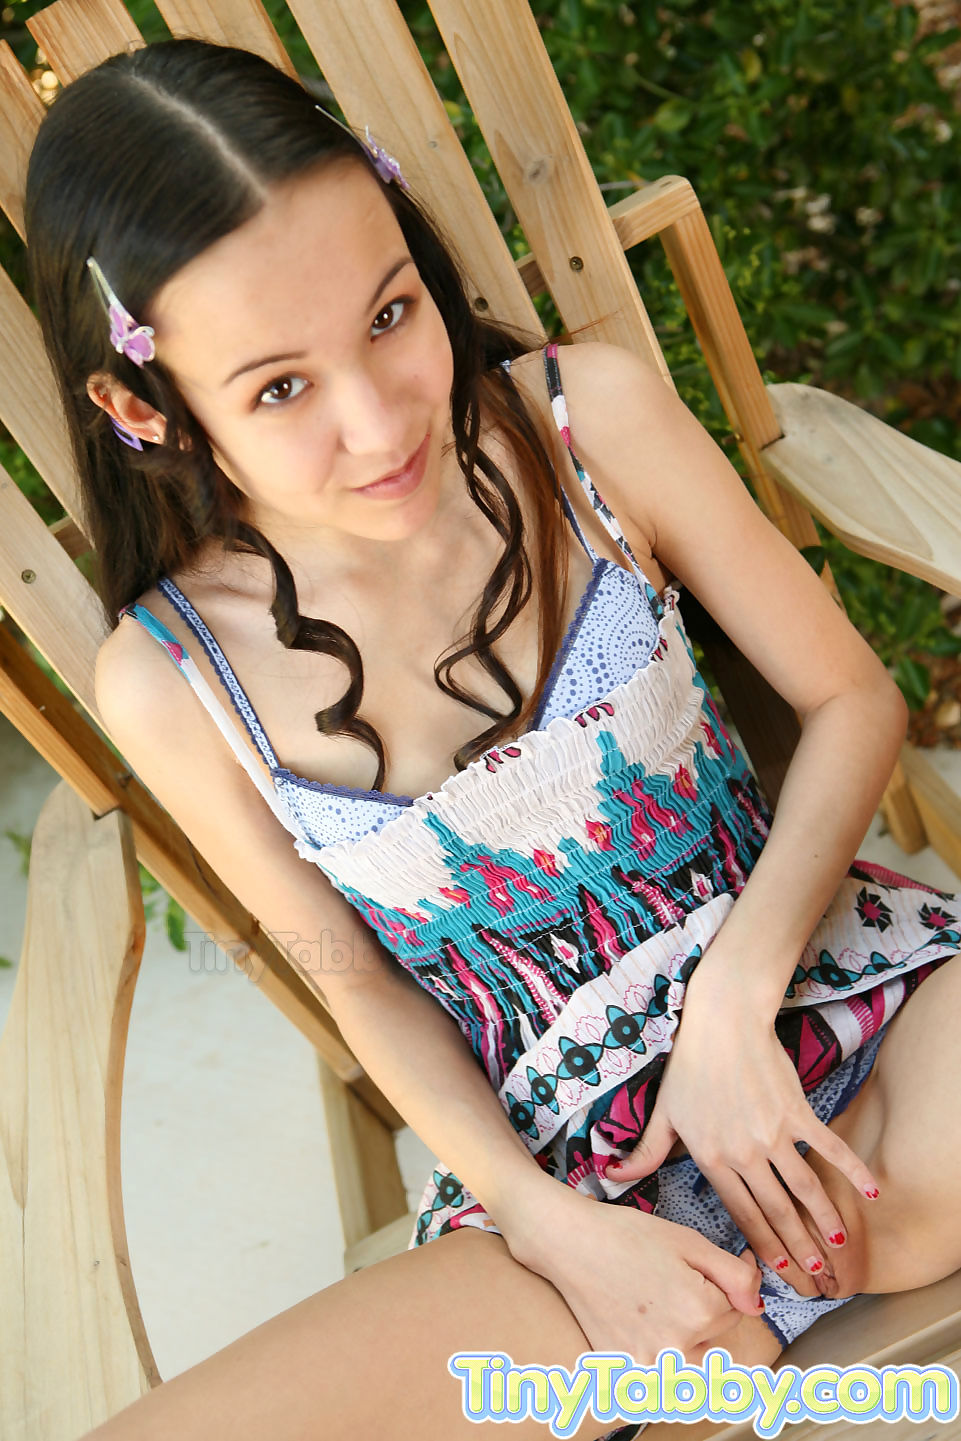 Hot teen spreads her leg on the wooden chair - part 1973 page 1